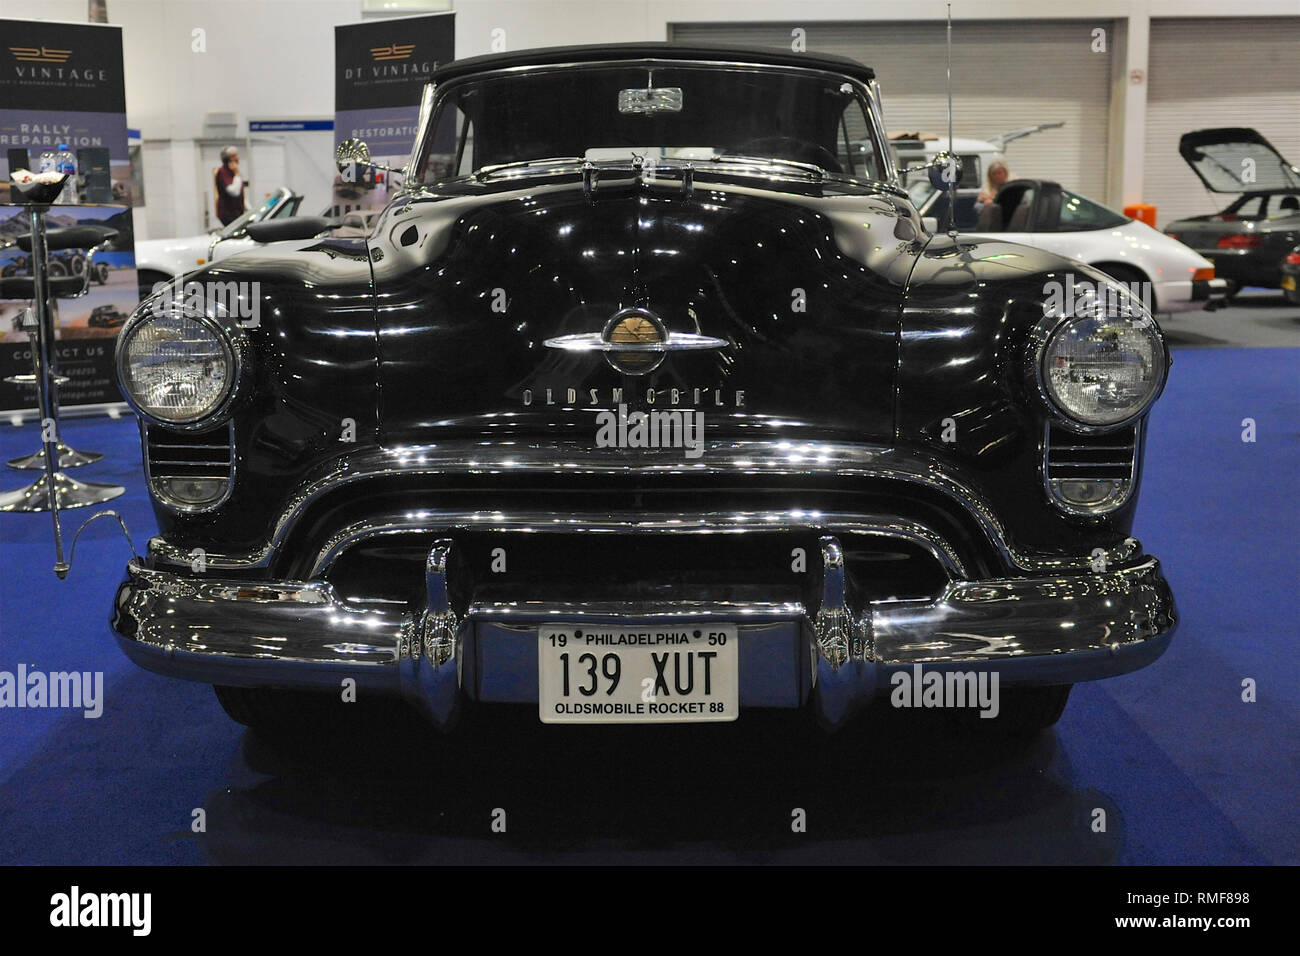 ExCel London, UK. 14th Feb 2019. London, UK. 14th Feb, 2019. A 1950 Oldsmobile 'Rocket' 88 Convertible on display at the London Classic Car Show which is taking place at ExCel London, United Kingdom.  Around 700 of the world's finest classic cars are on display at the show ranging from vintage pre-war tourers to a modern concept cars. The show brings in around 37,000 visitors, ranging from serious petrol heads to people who just love beautiful and classic vehicles. Credit: Michael Preston/Alamy Live News Stock Photo